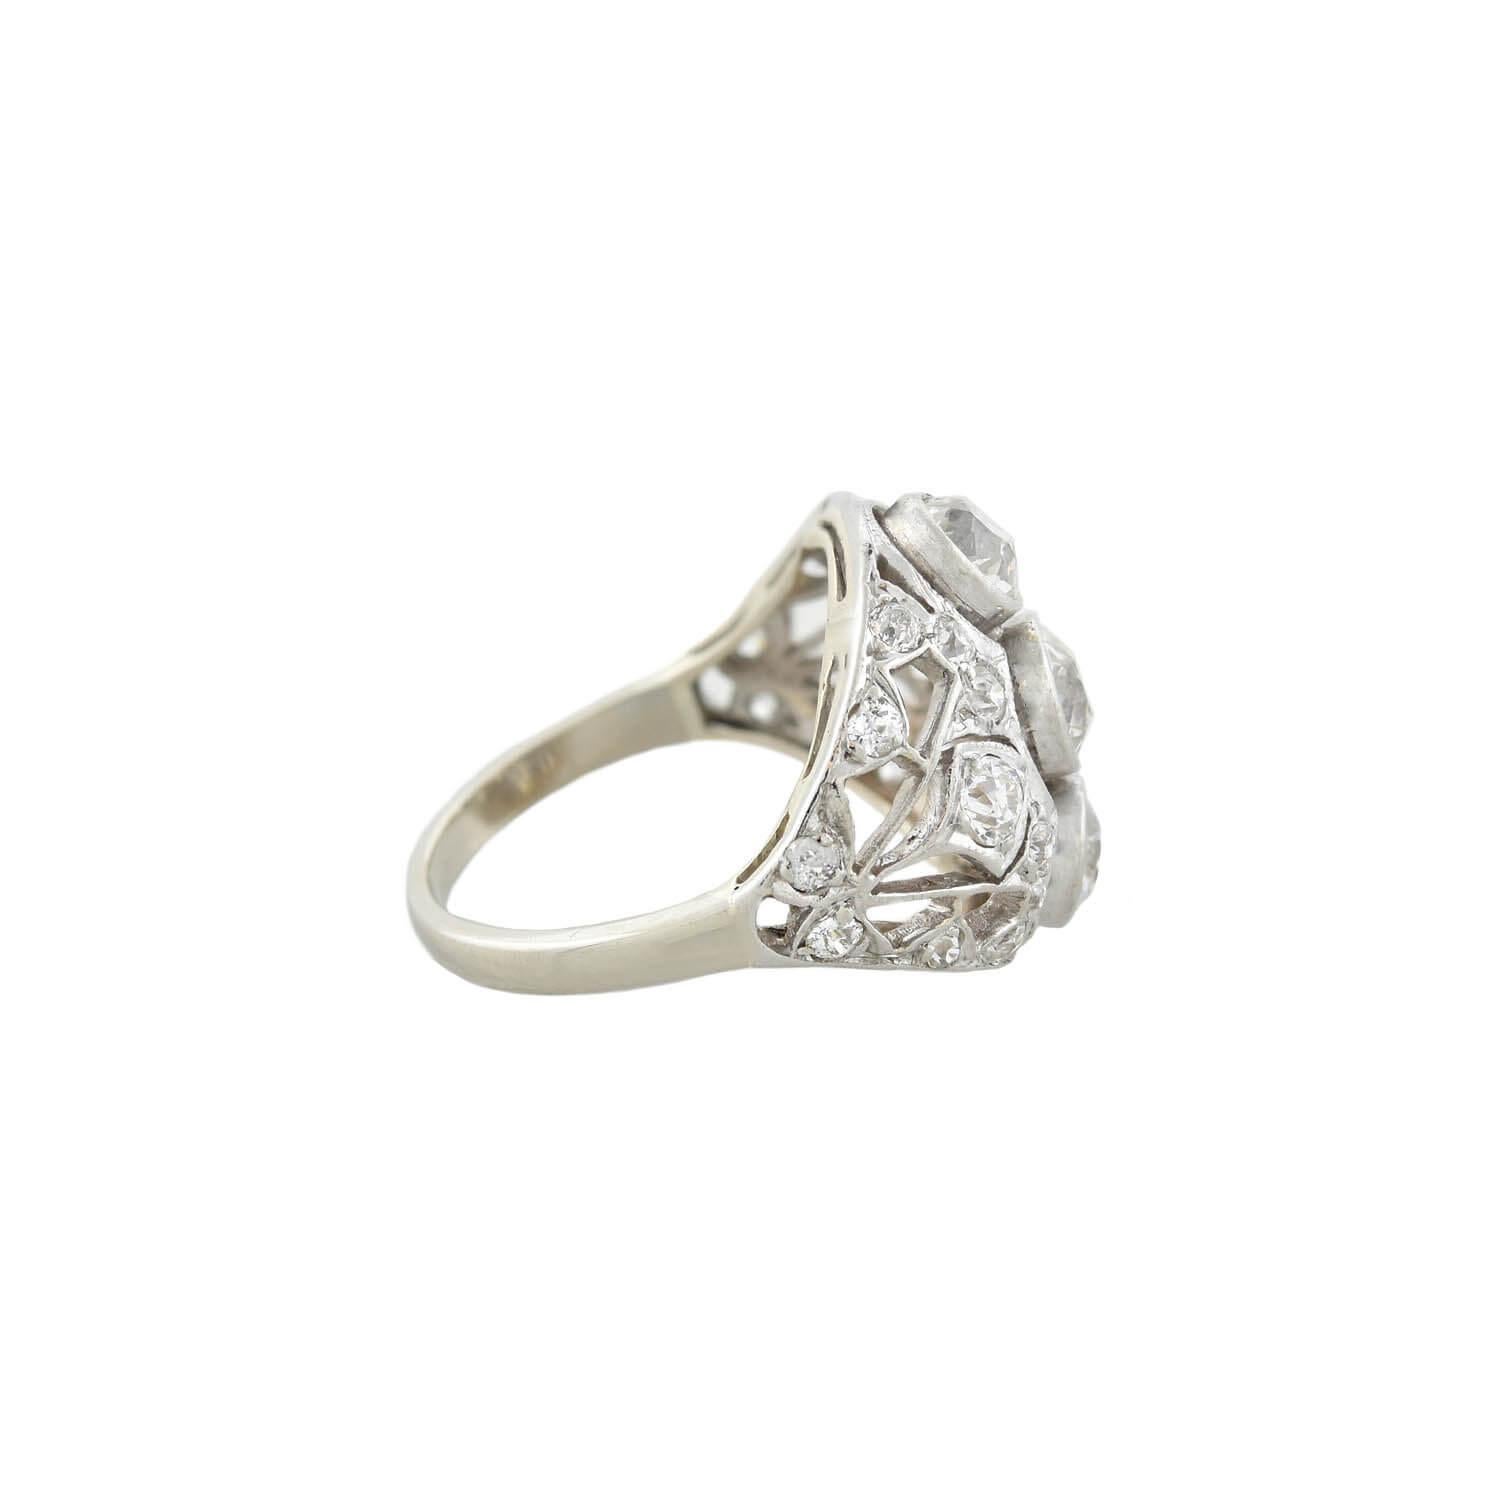 A striking handmade diamond dome ring from the Edwardian (ca1910s) era! Crafted in 14kt yellow gold and topped in platinum, this diamond ring adorns three Old Mine Cut diamonds in a row at its center. The ring features light-catching milgrain and a